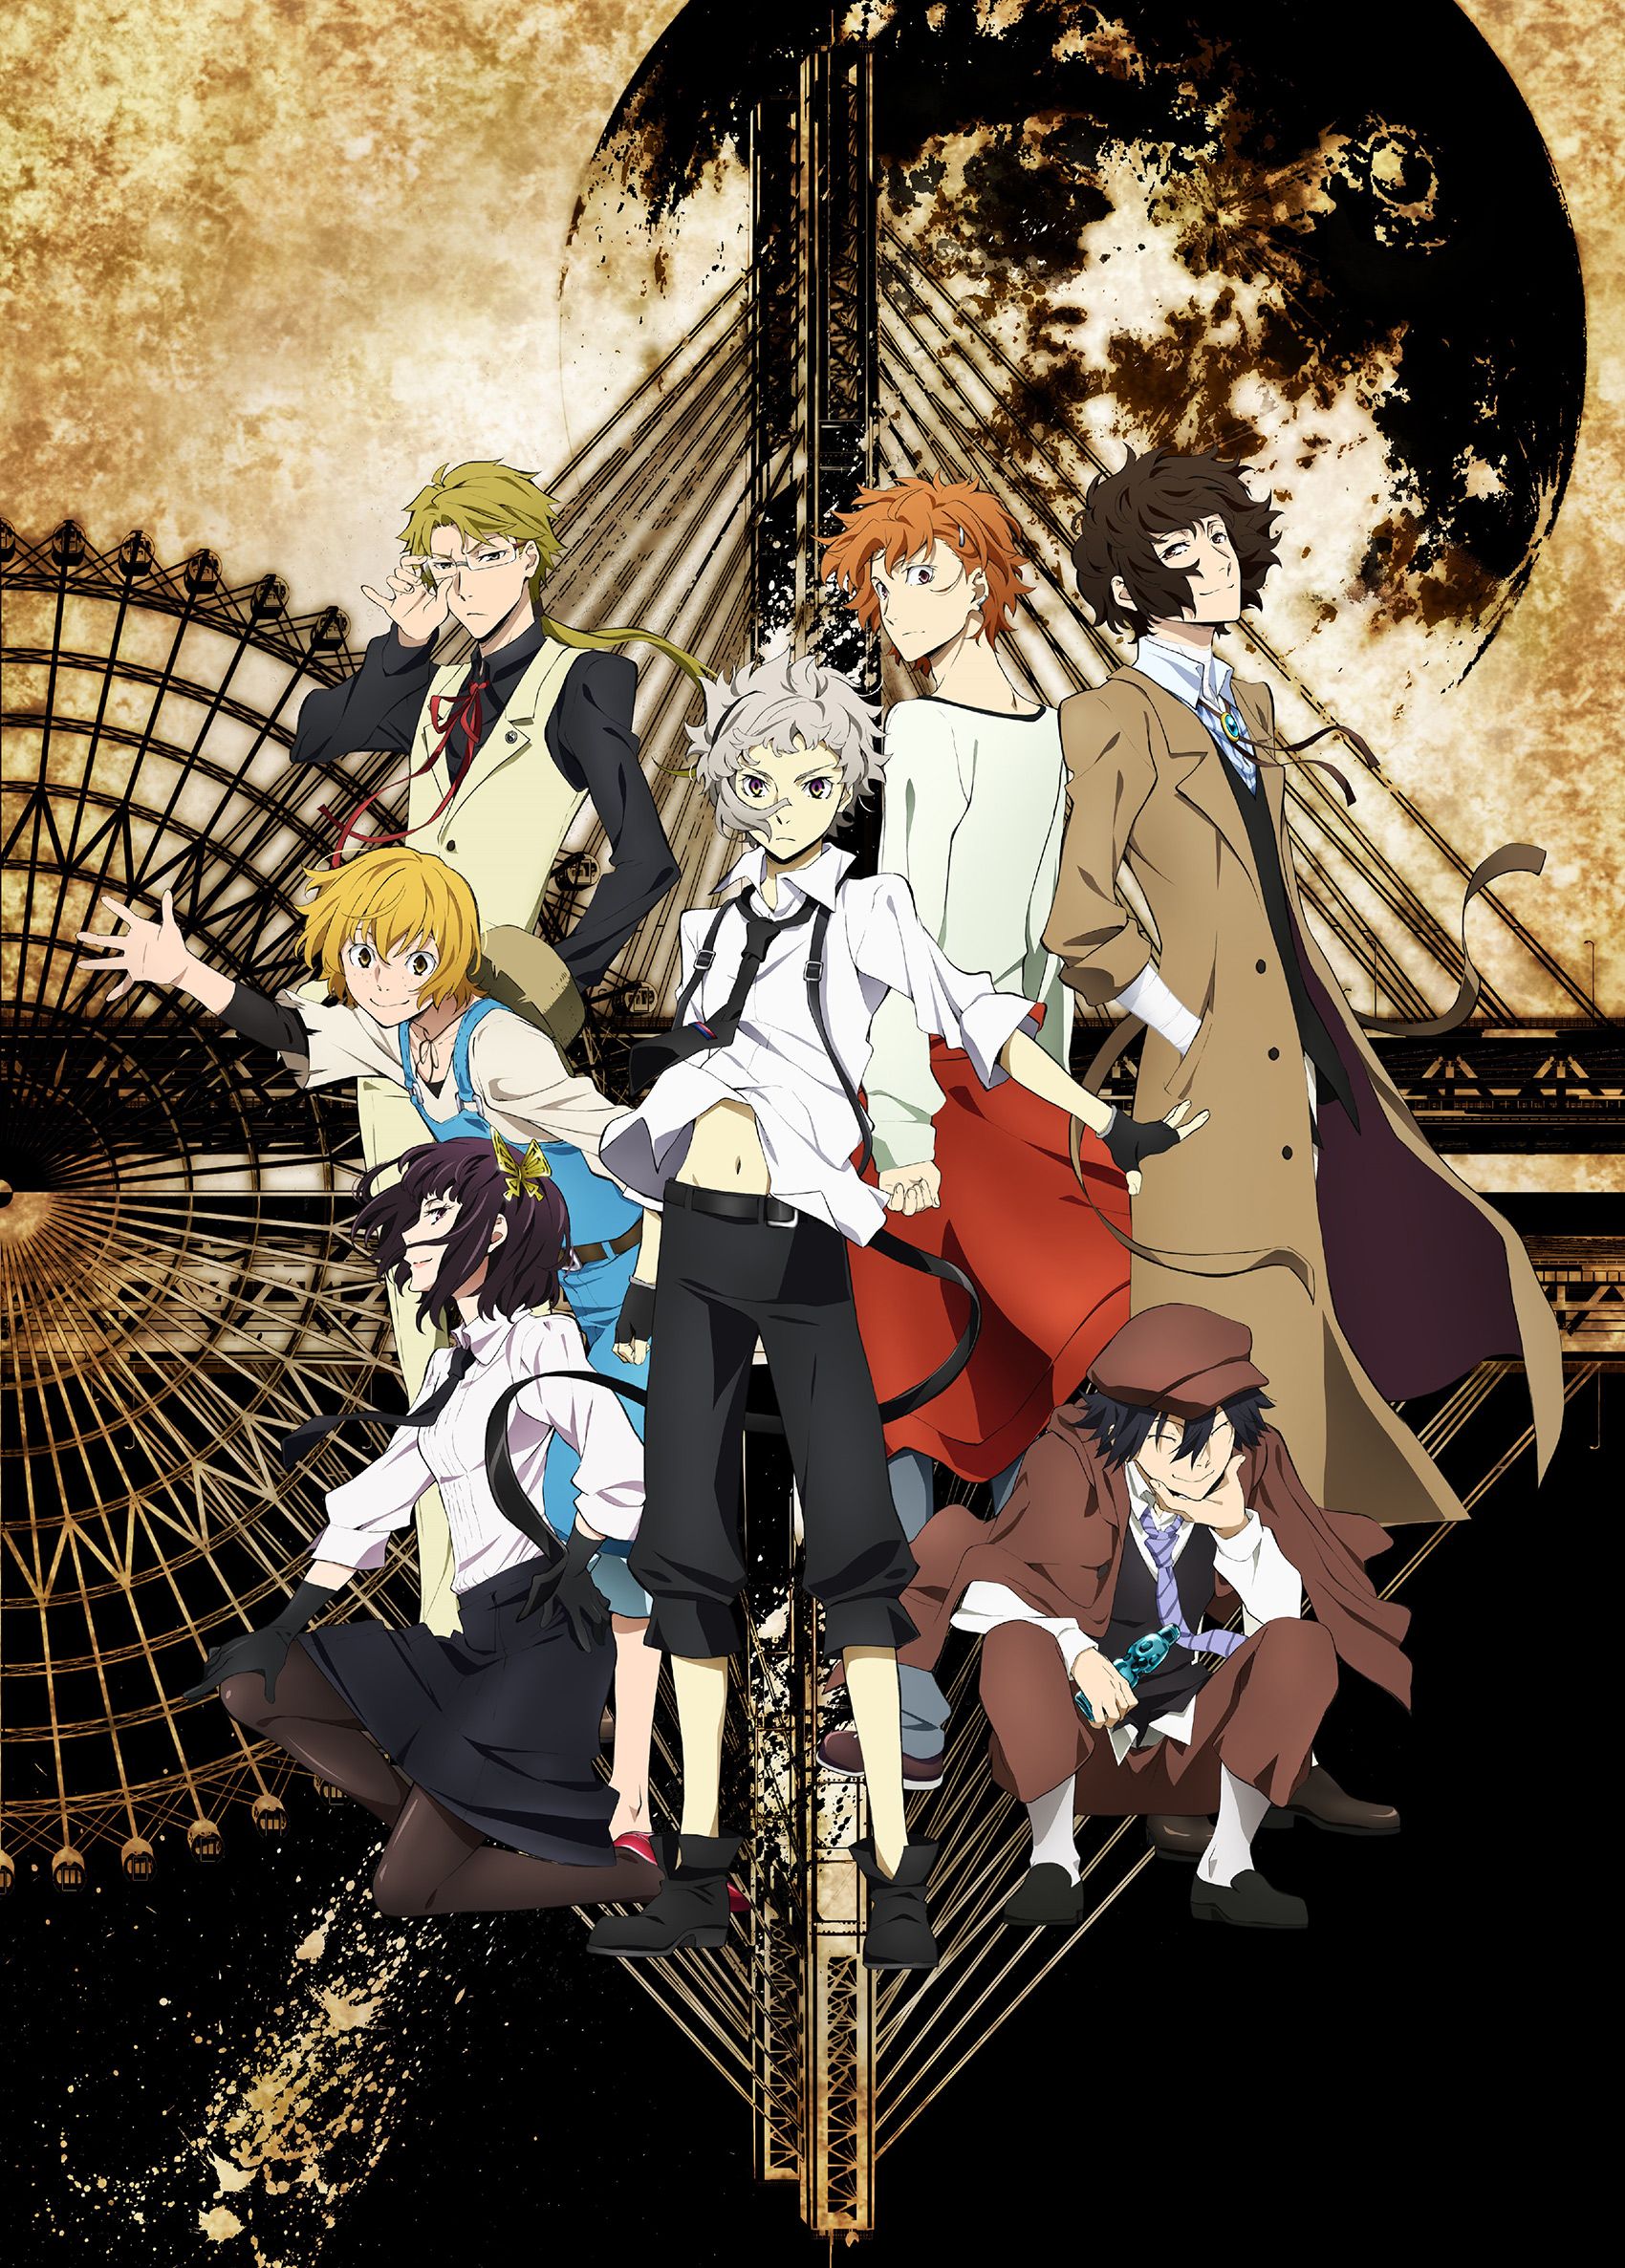 Armed Detective Agency. Bungo Stray Dogs